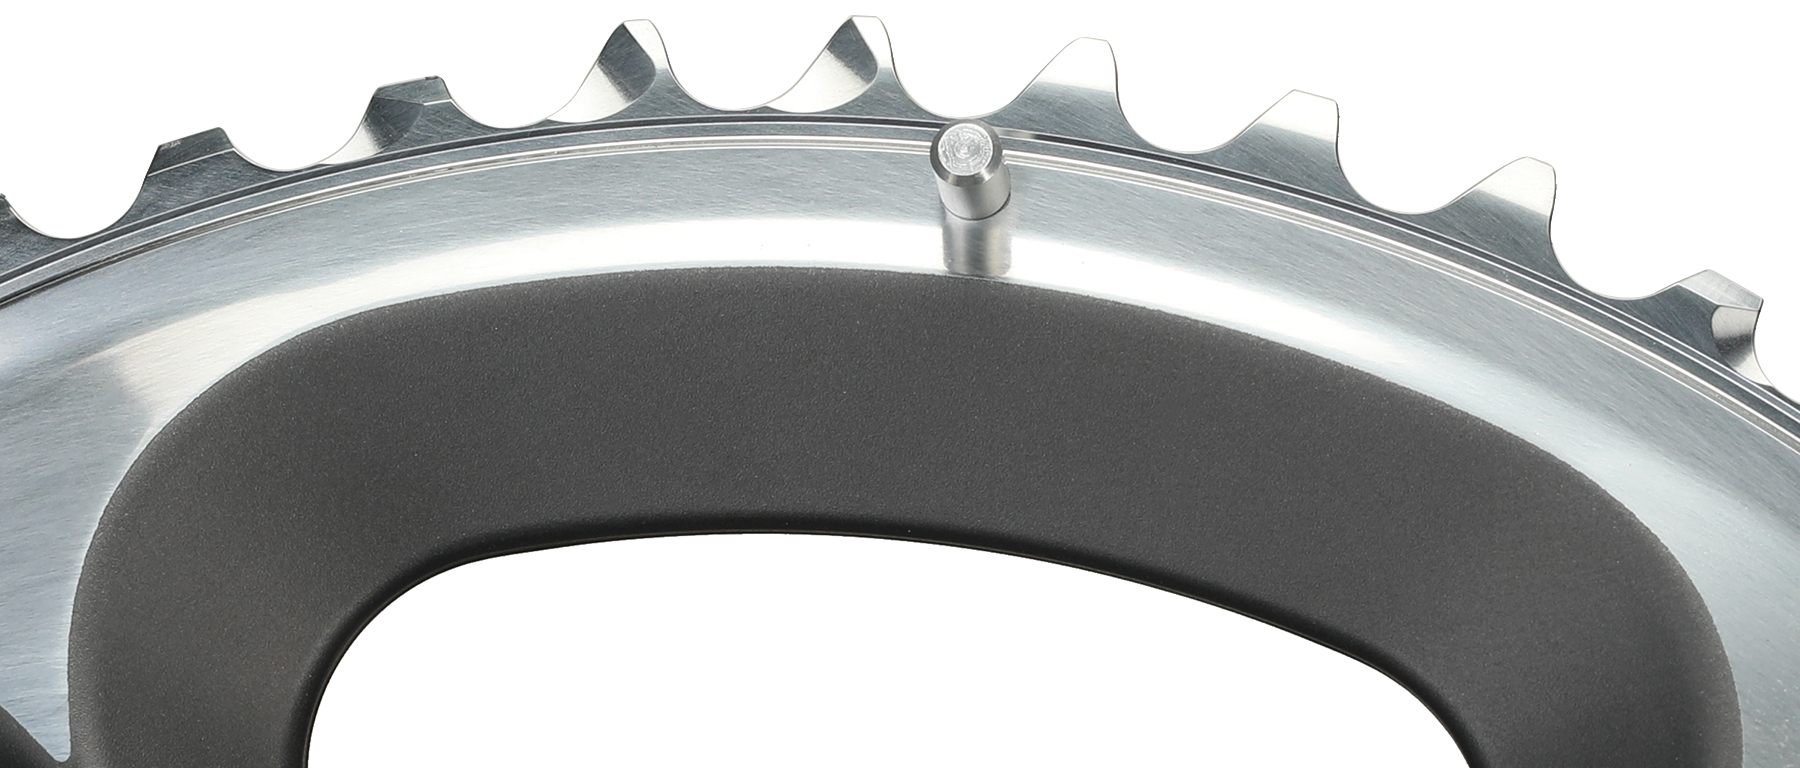 Shimano Dura-Ace FC-7900 Outer Chainring